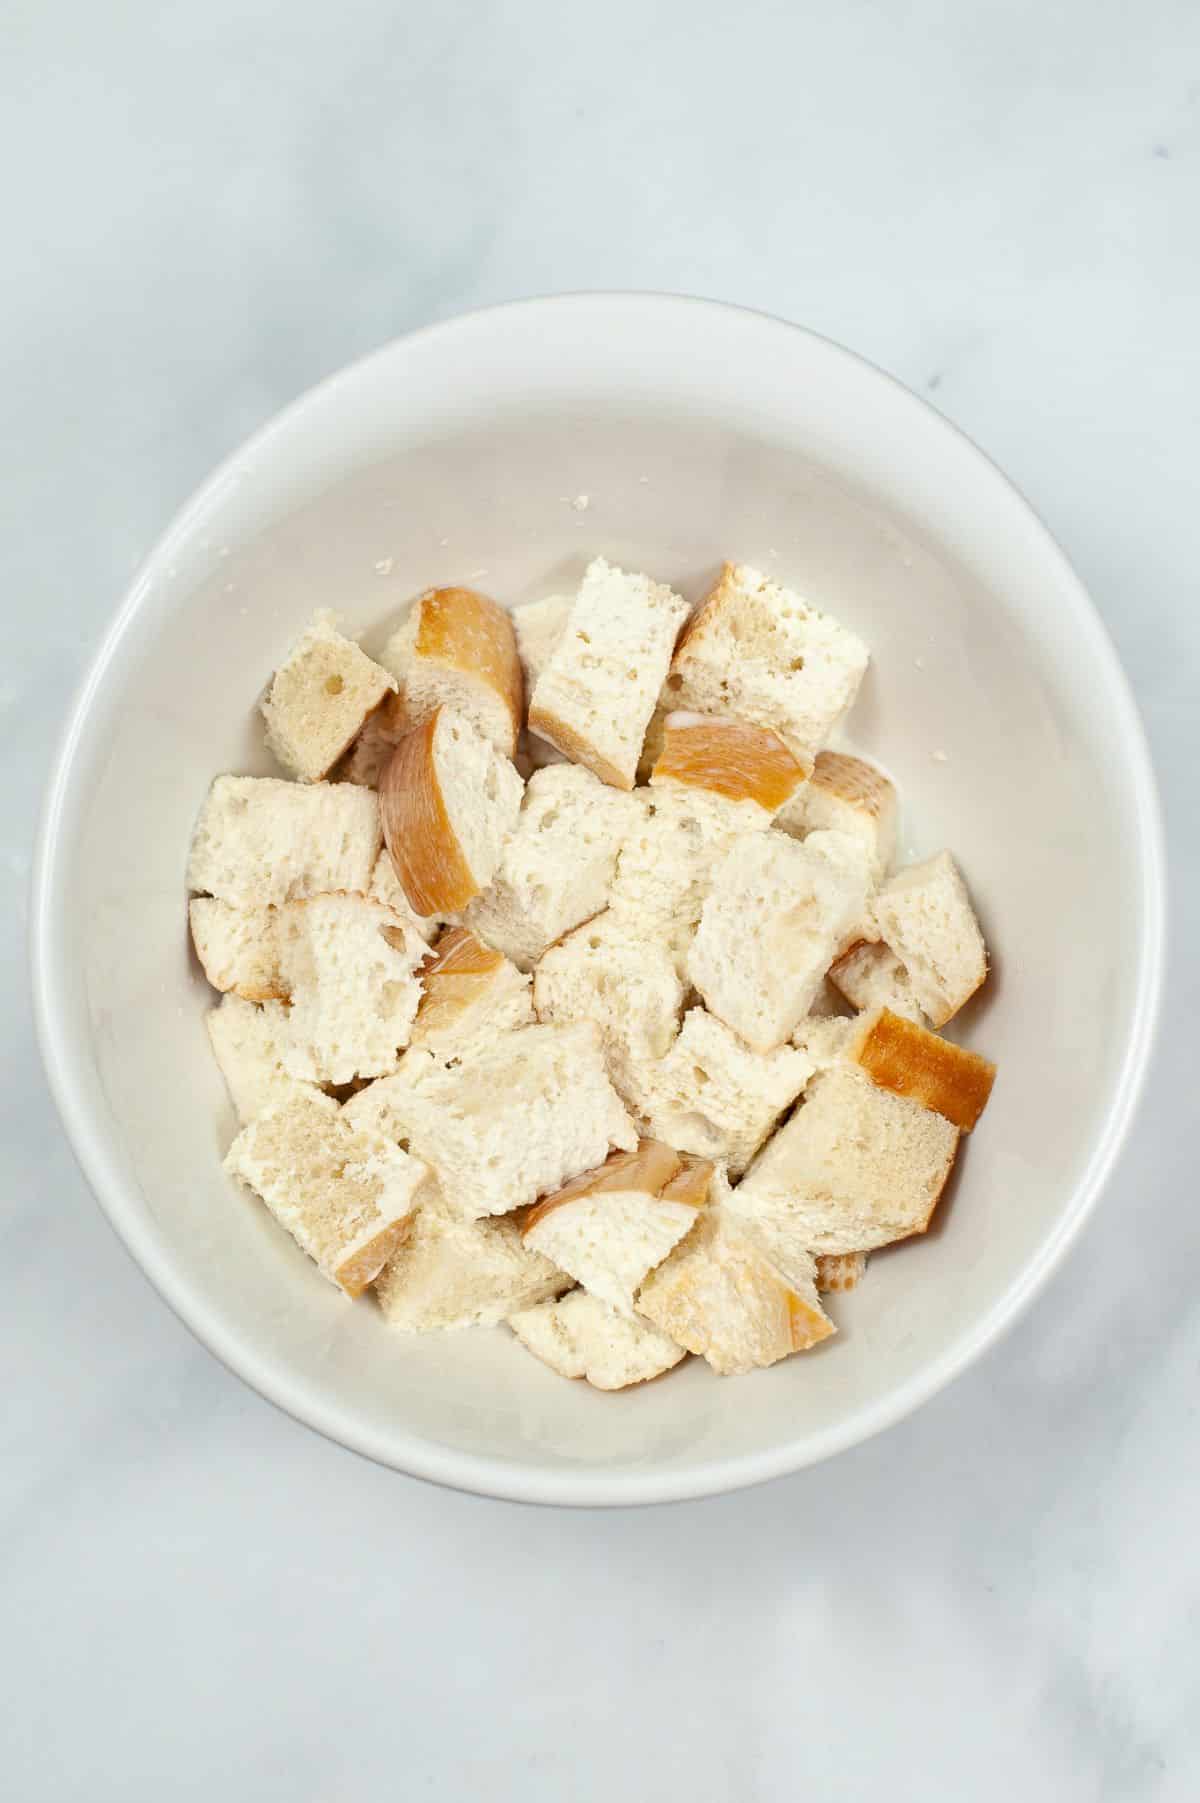 bread cubes, heavy whipping cream and milk are being combined in a bowl.